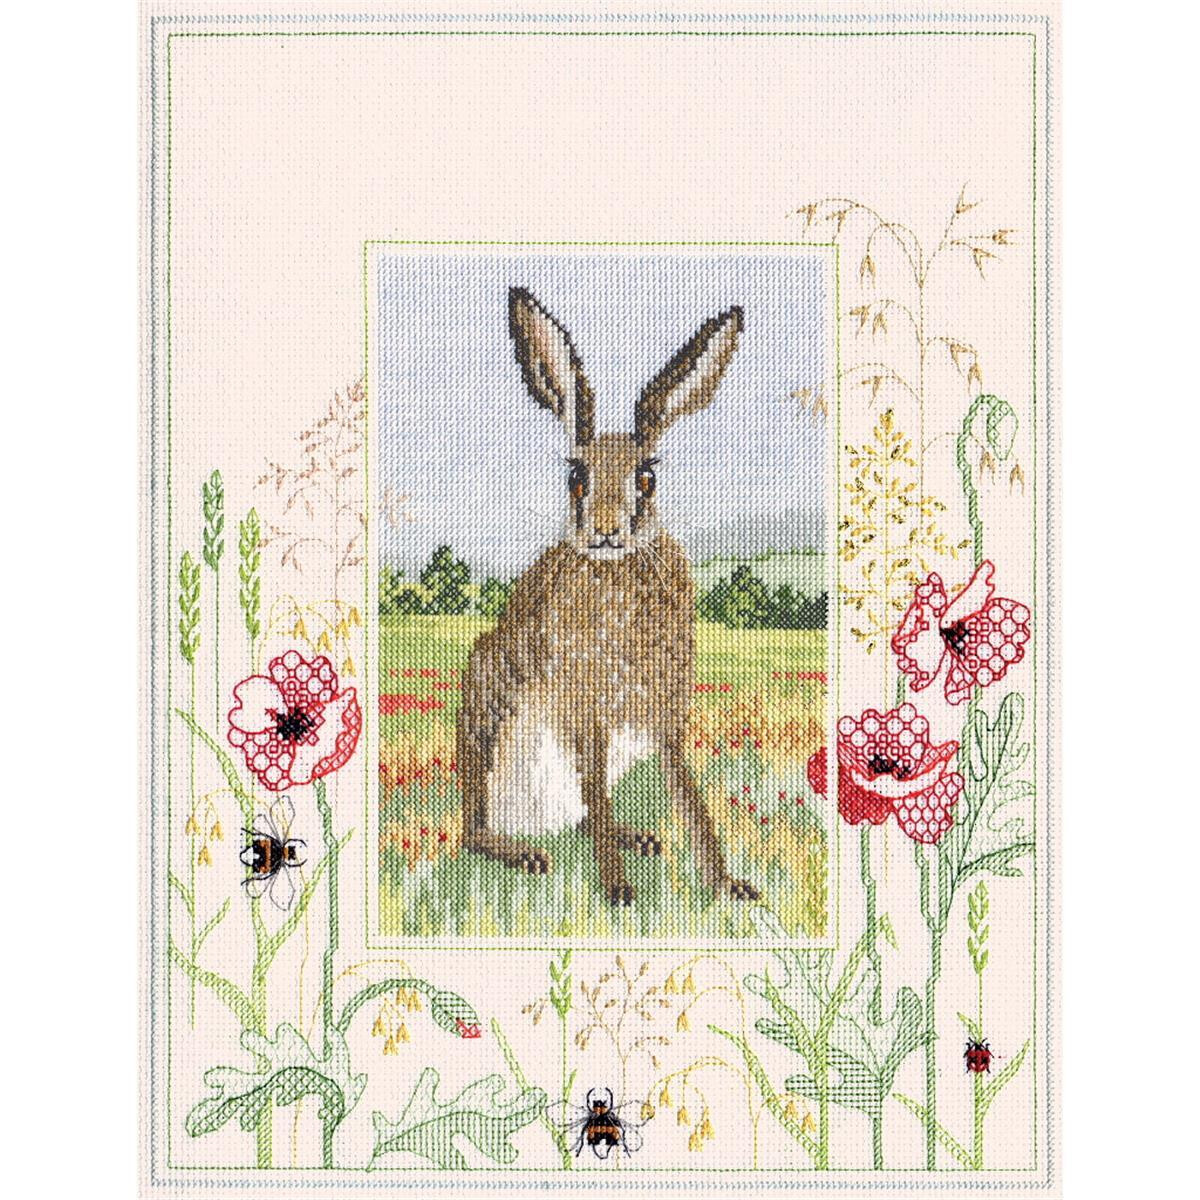 A detailed embroidery pack embroidery from Bothy Threads...